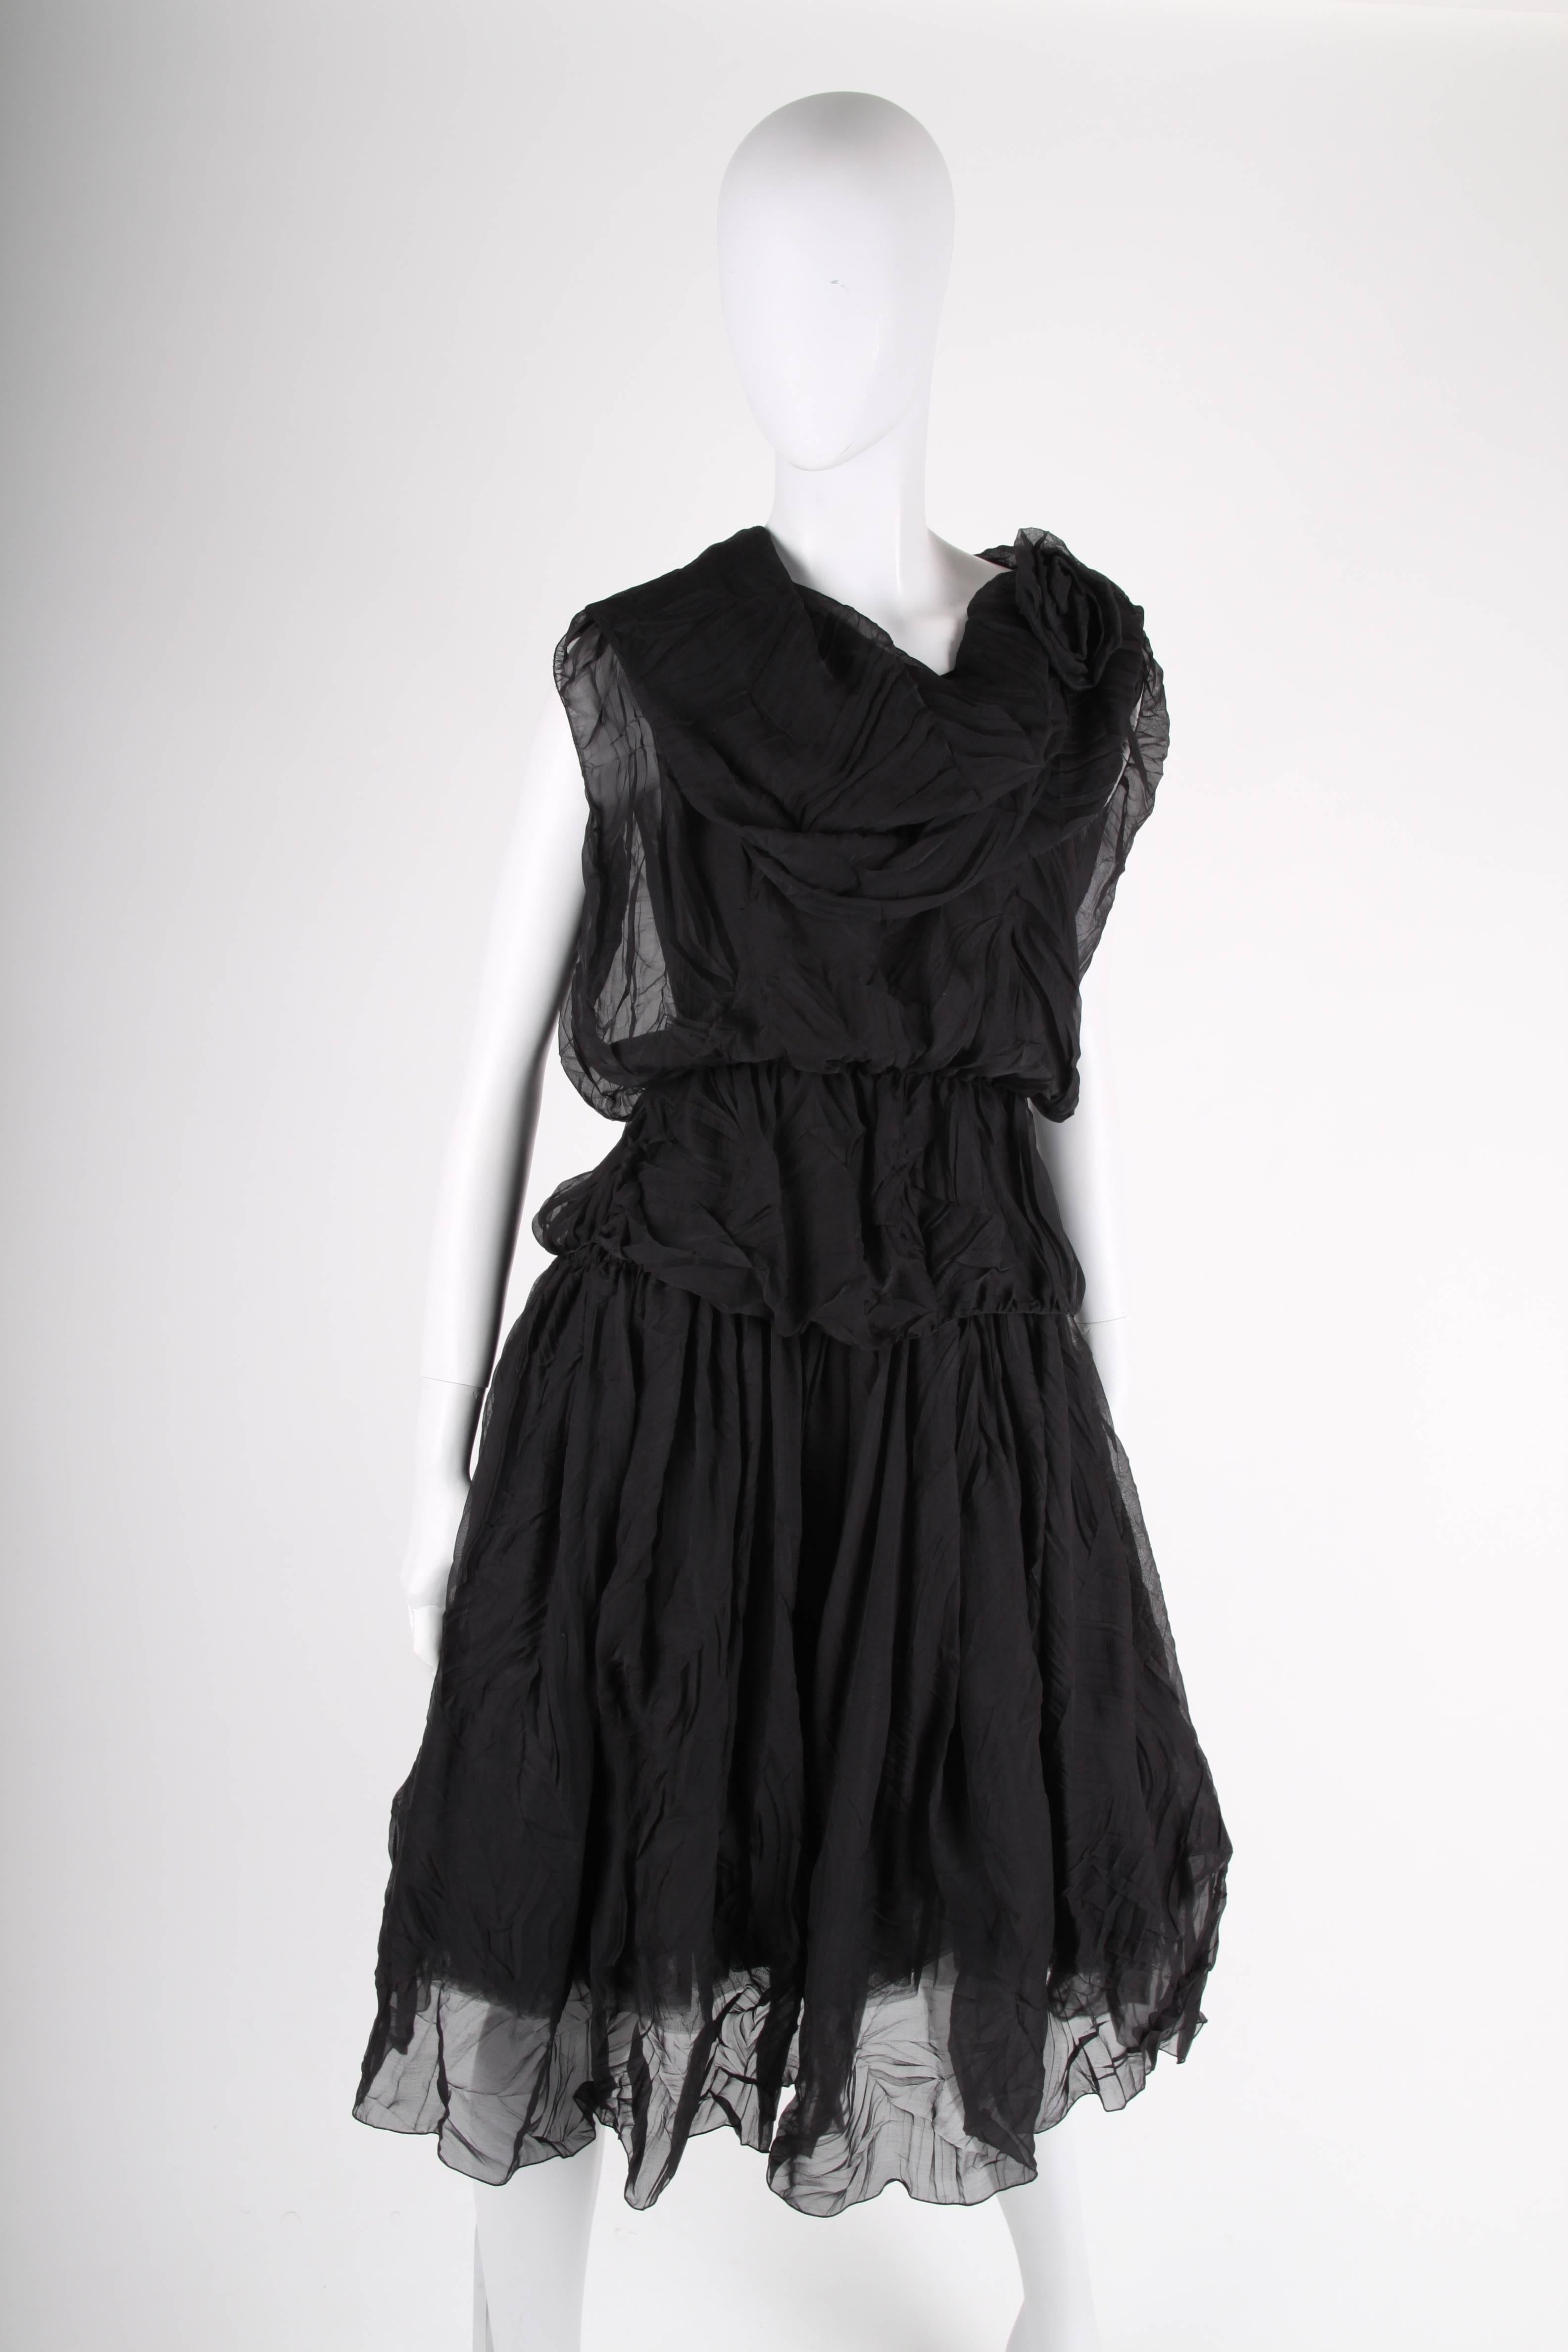 A silk beauty from the Chanel fall collection of 2000.

Sleeveless black dress with a round neckline and multiple layers of wrinkled silk. A camellia corsage on the left shoulder. Zip closure on the back. Underneath the wide skirt you will find a